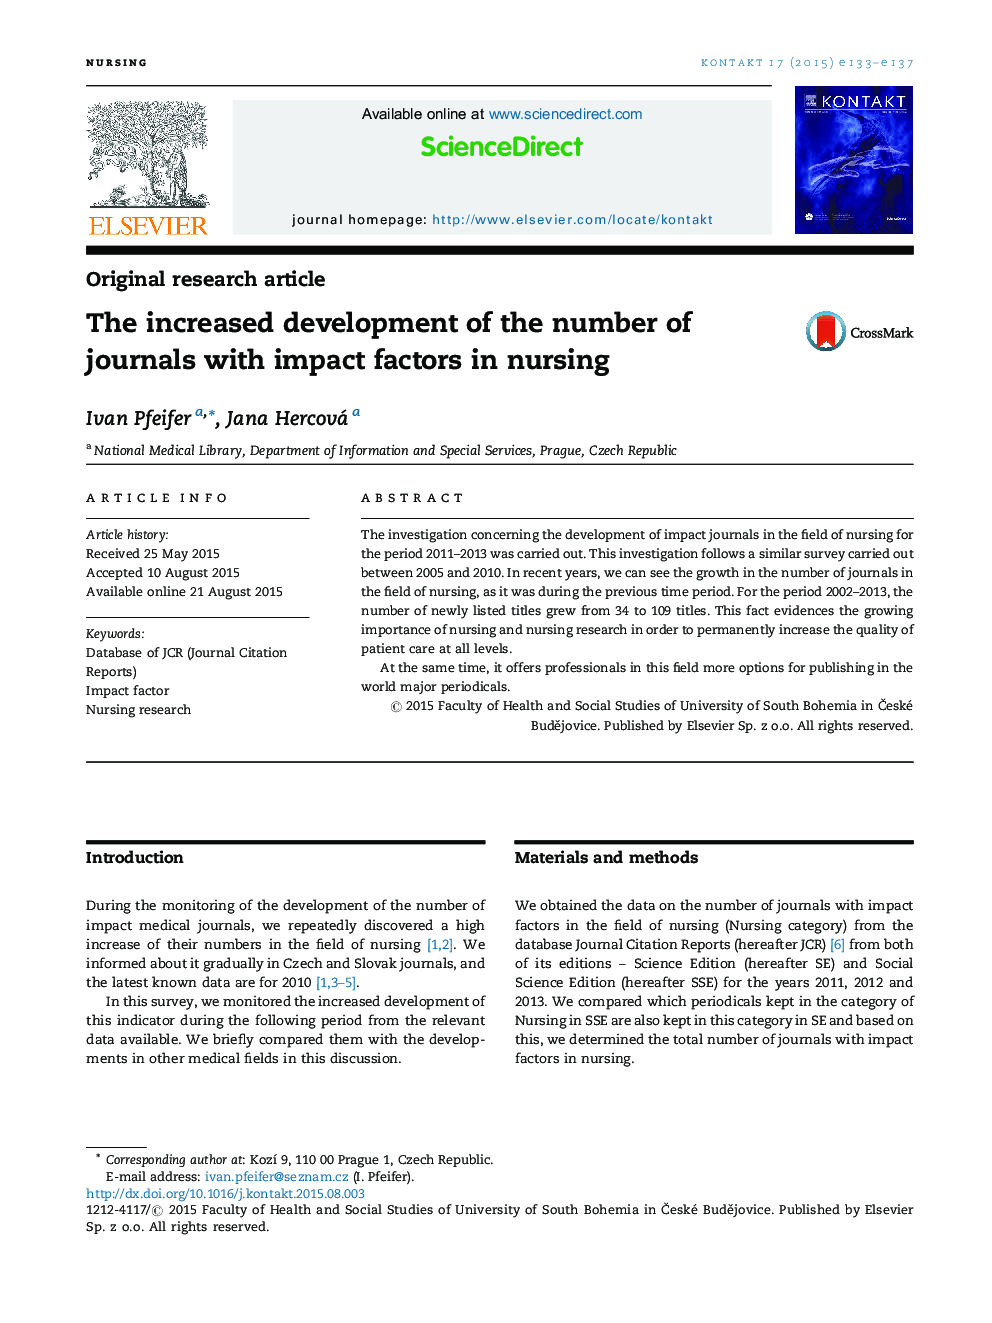 The increased development of the number of journals with impact factors in nursing